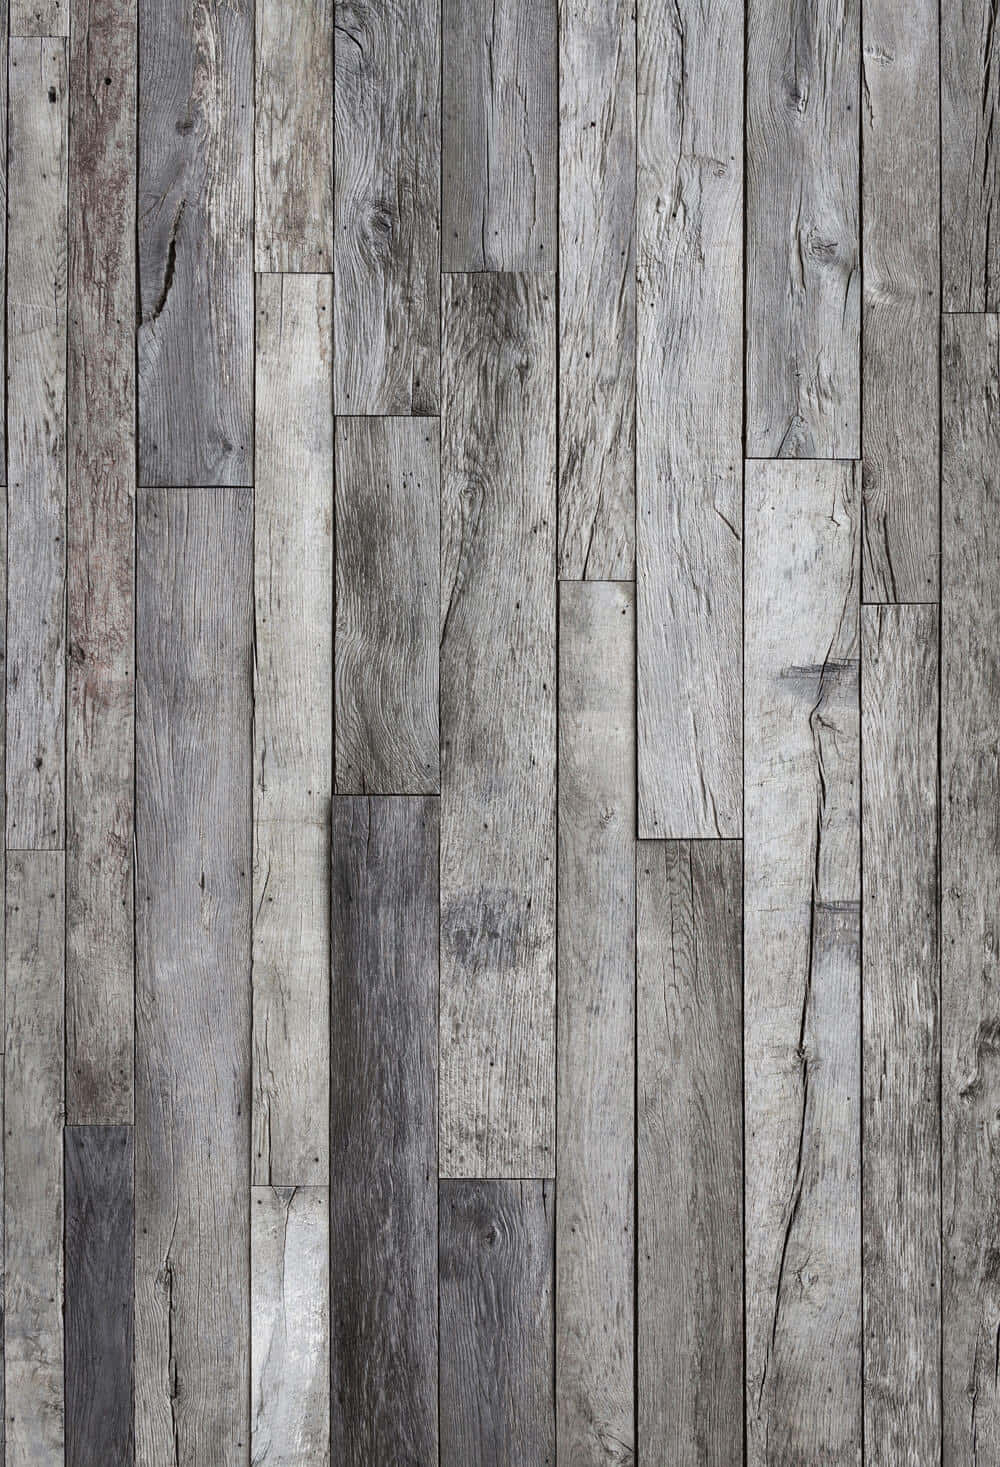 Aesthetic Wood Texture with Gray Hues